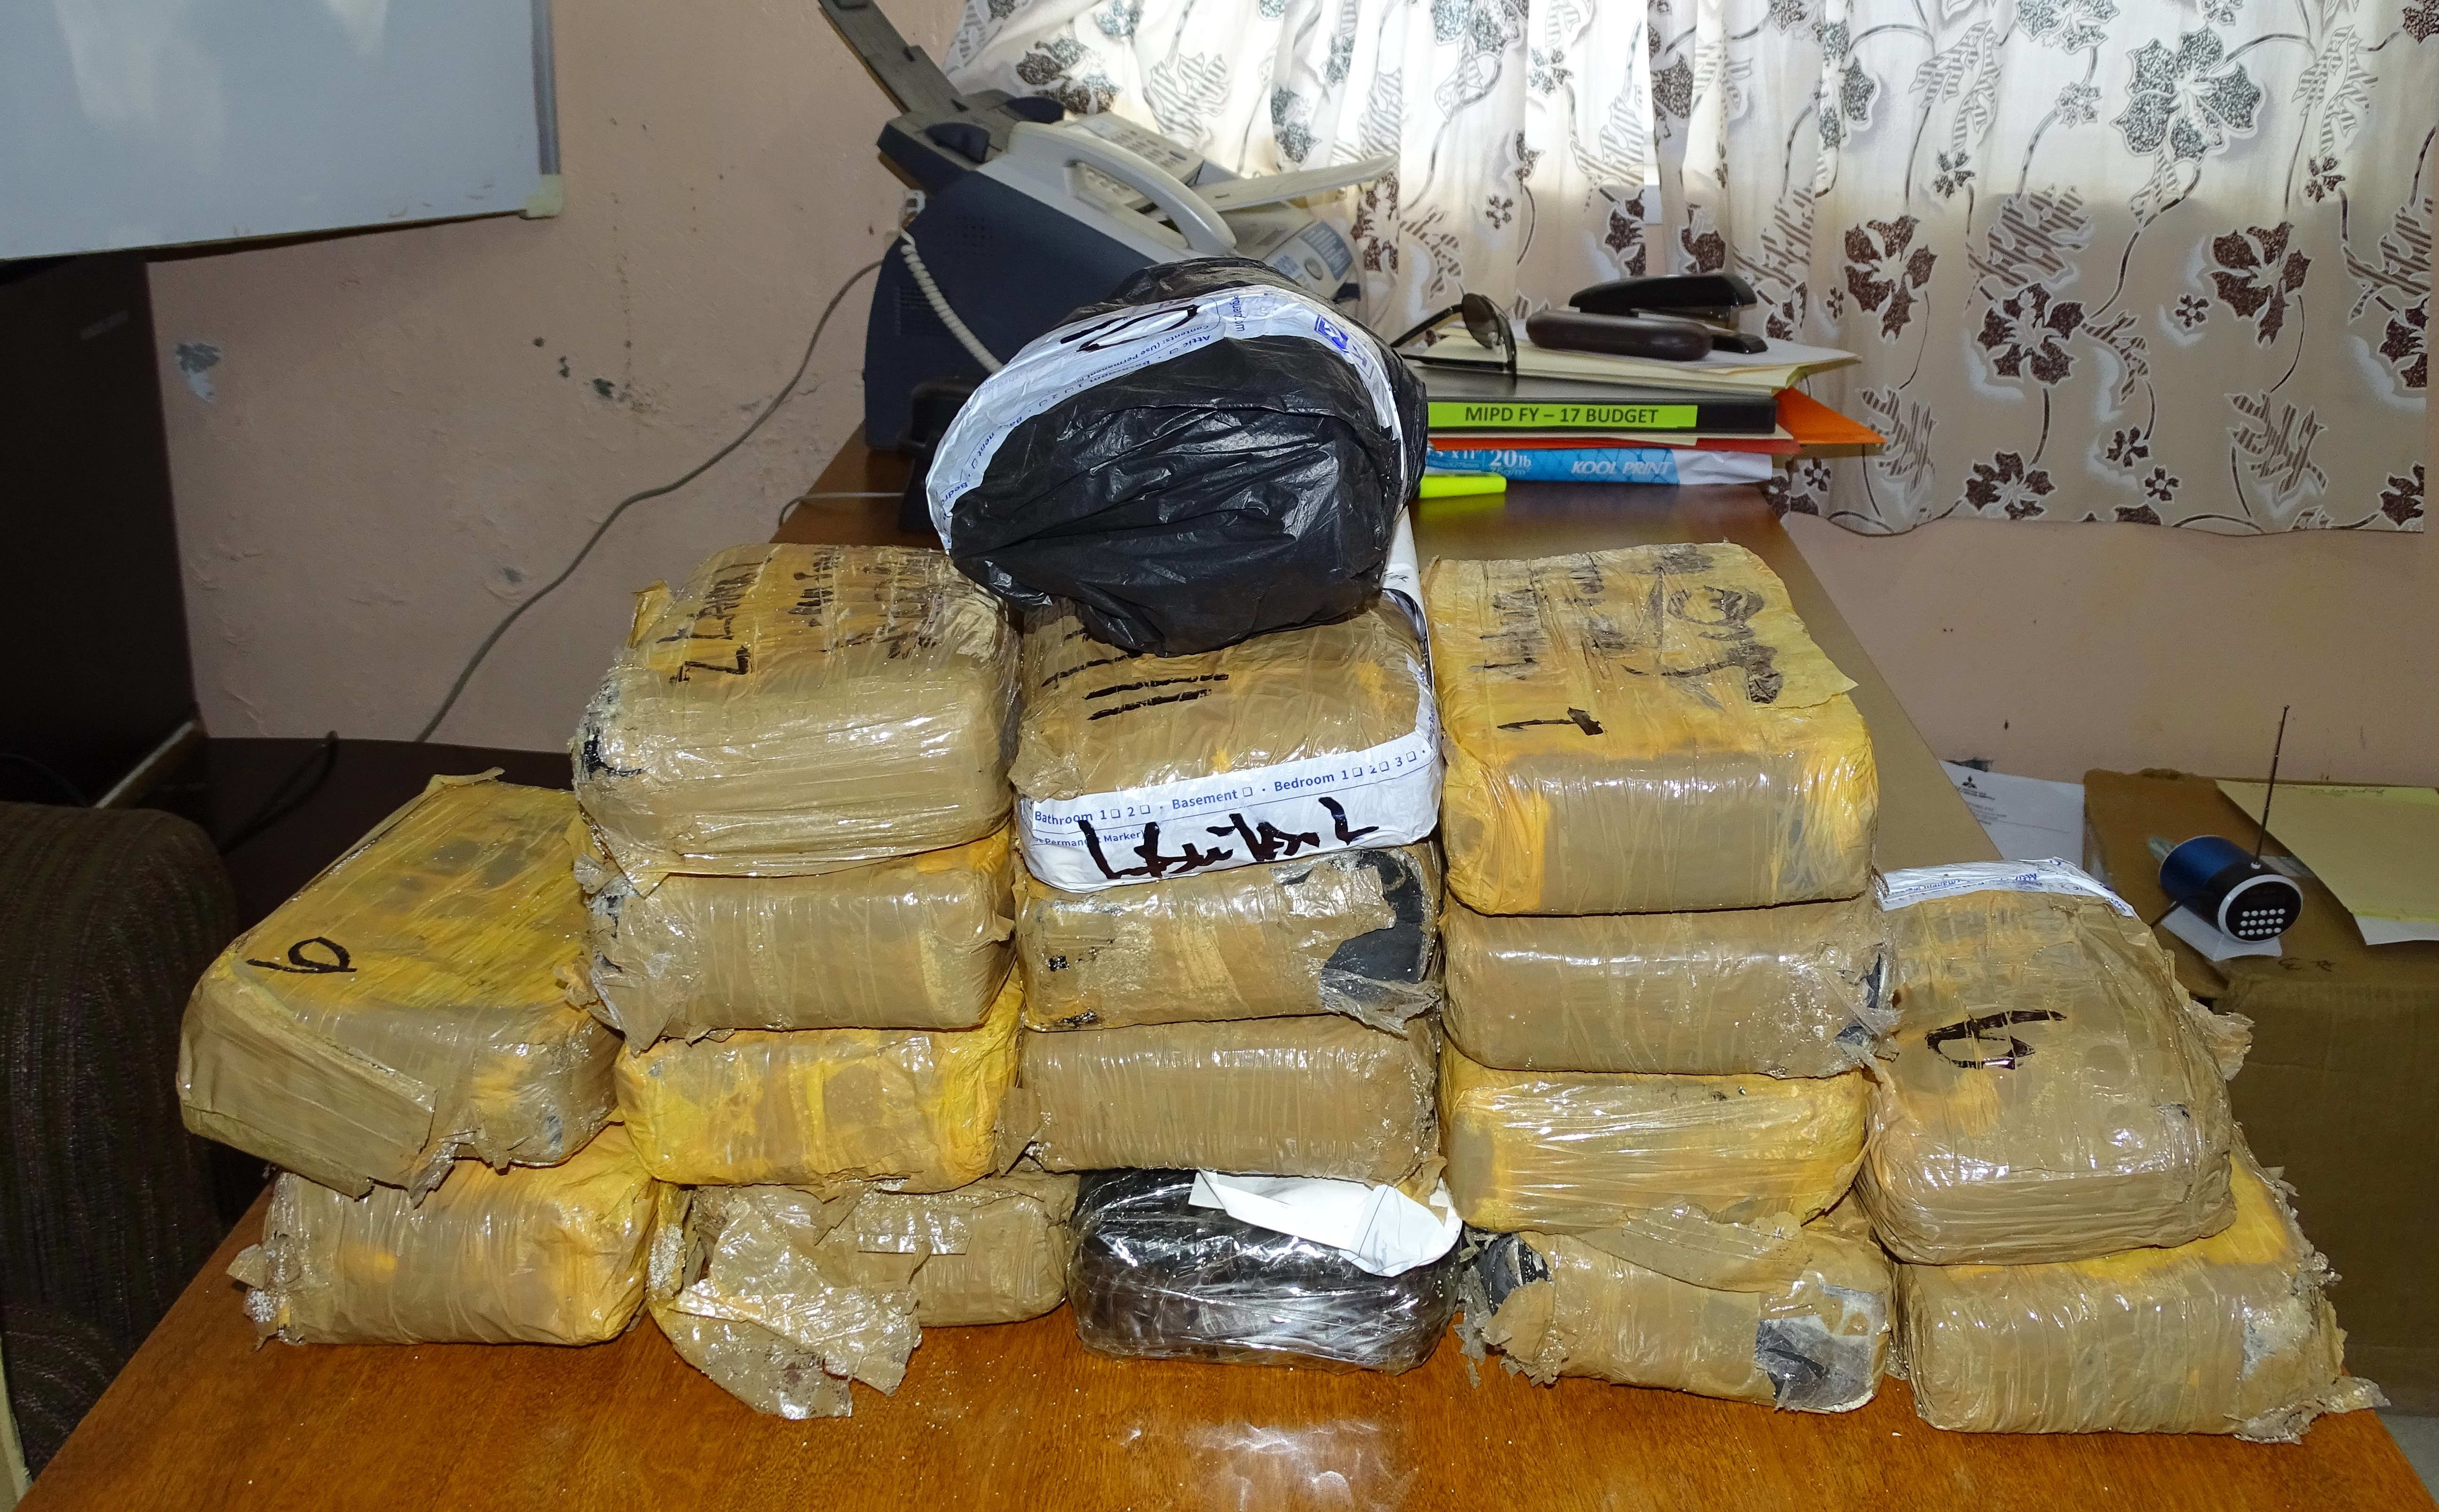 This file photo shows a cache of cocaine that washed into Enewetak Atoll in the Marshall Islands in 2016 and was turned over to law enforcement authorities.